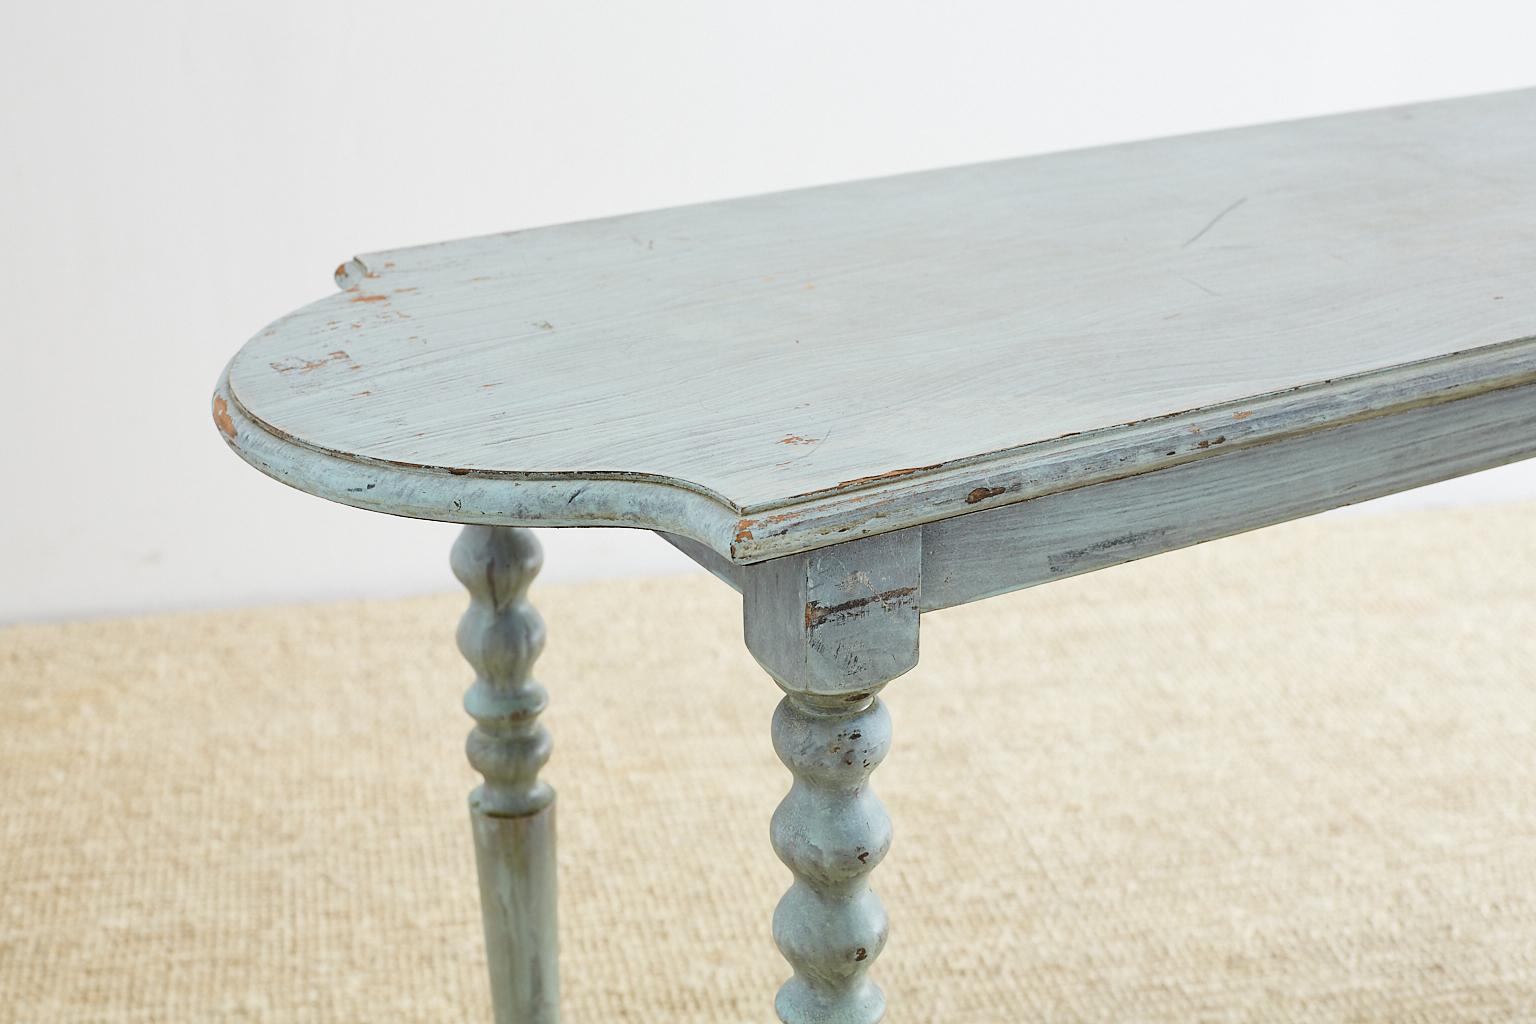 Vintage console or sofa table featuring a distressed painted finish in a lovely robin's egg blue color. Rounded on both ends and supported by thin turned legs conjoined with a stretcher.